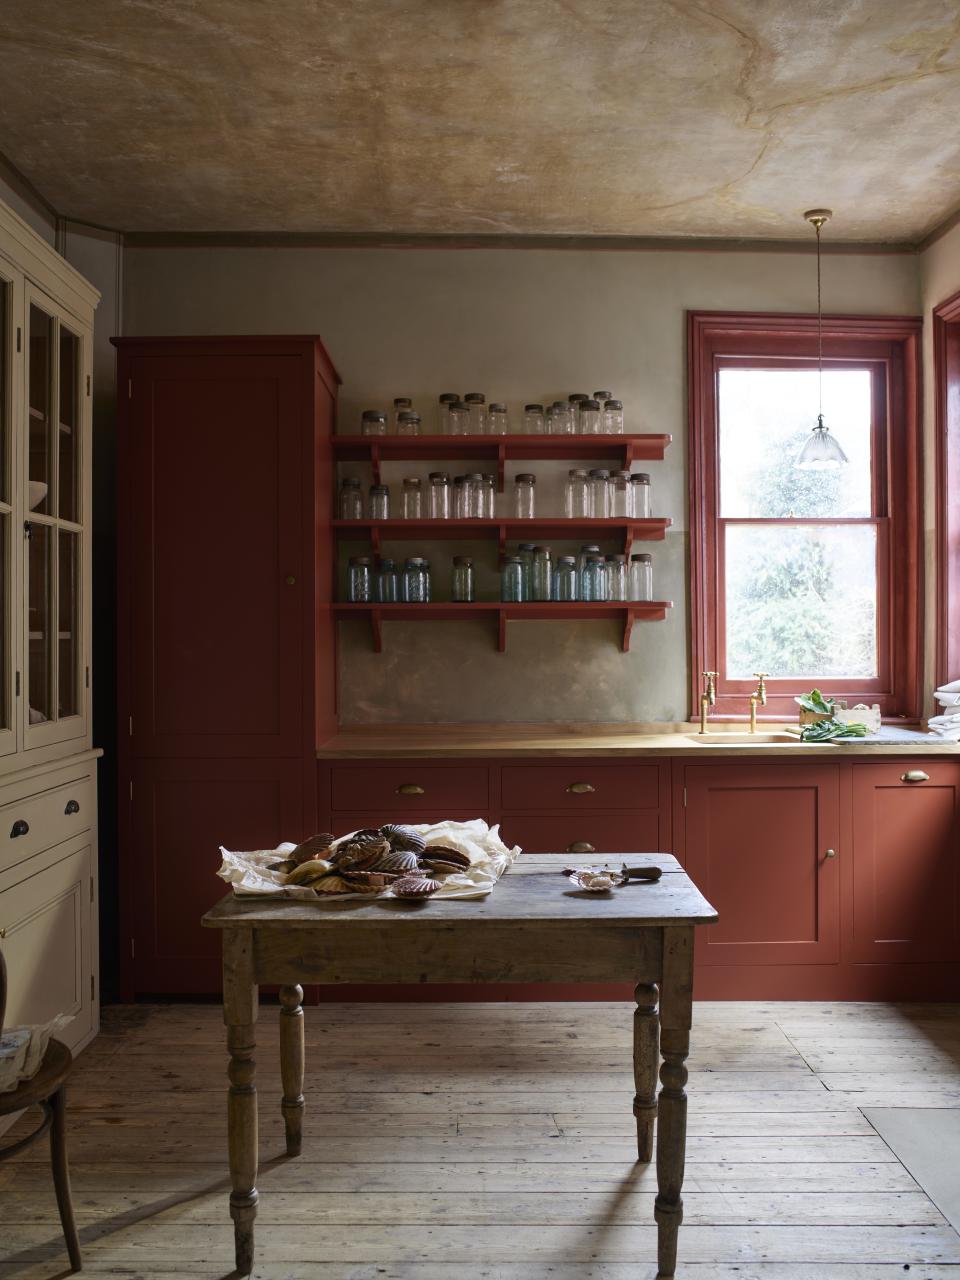 Choose a rusty brick red for a traditional kitchen